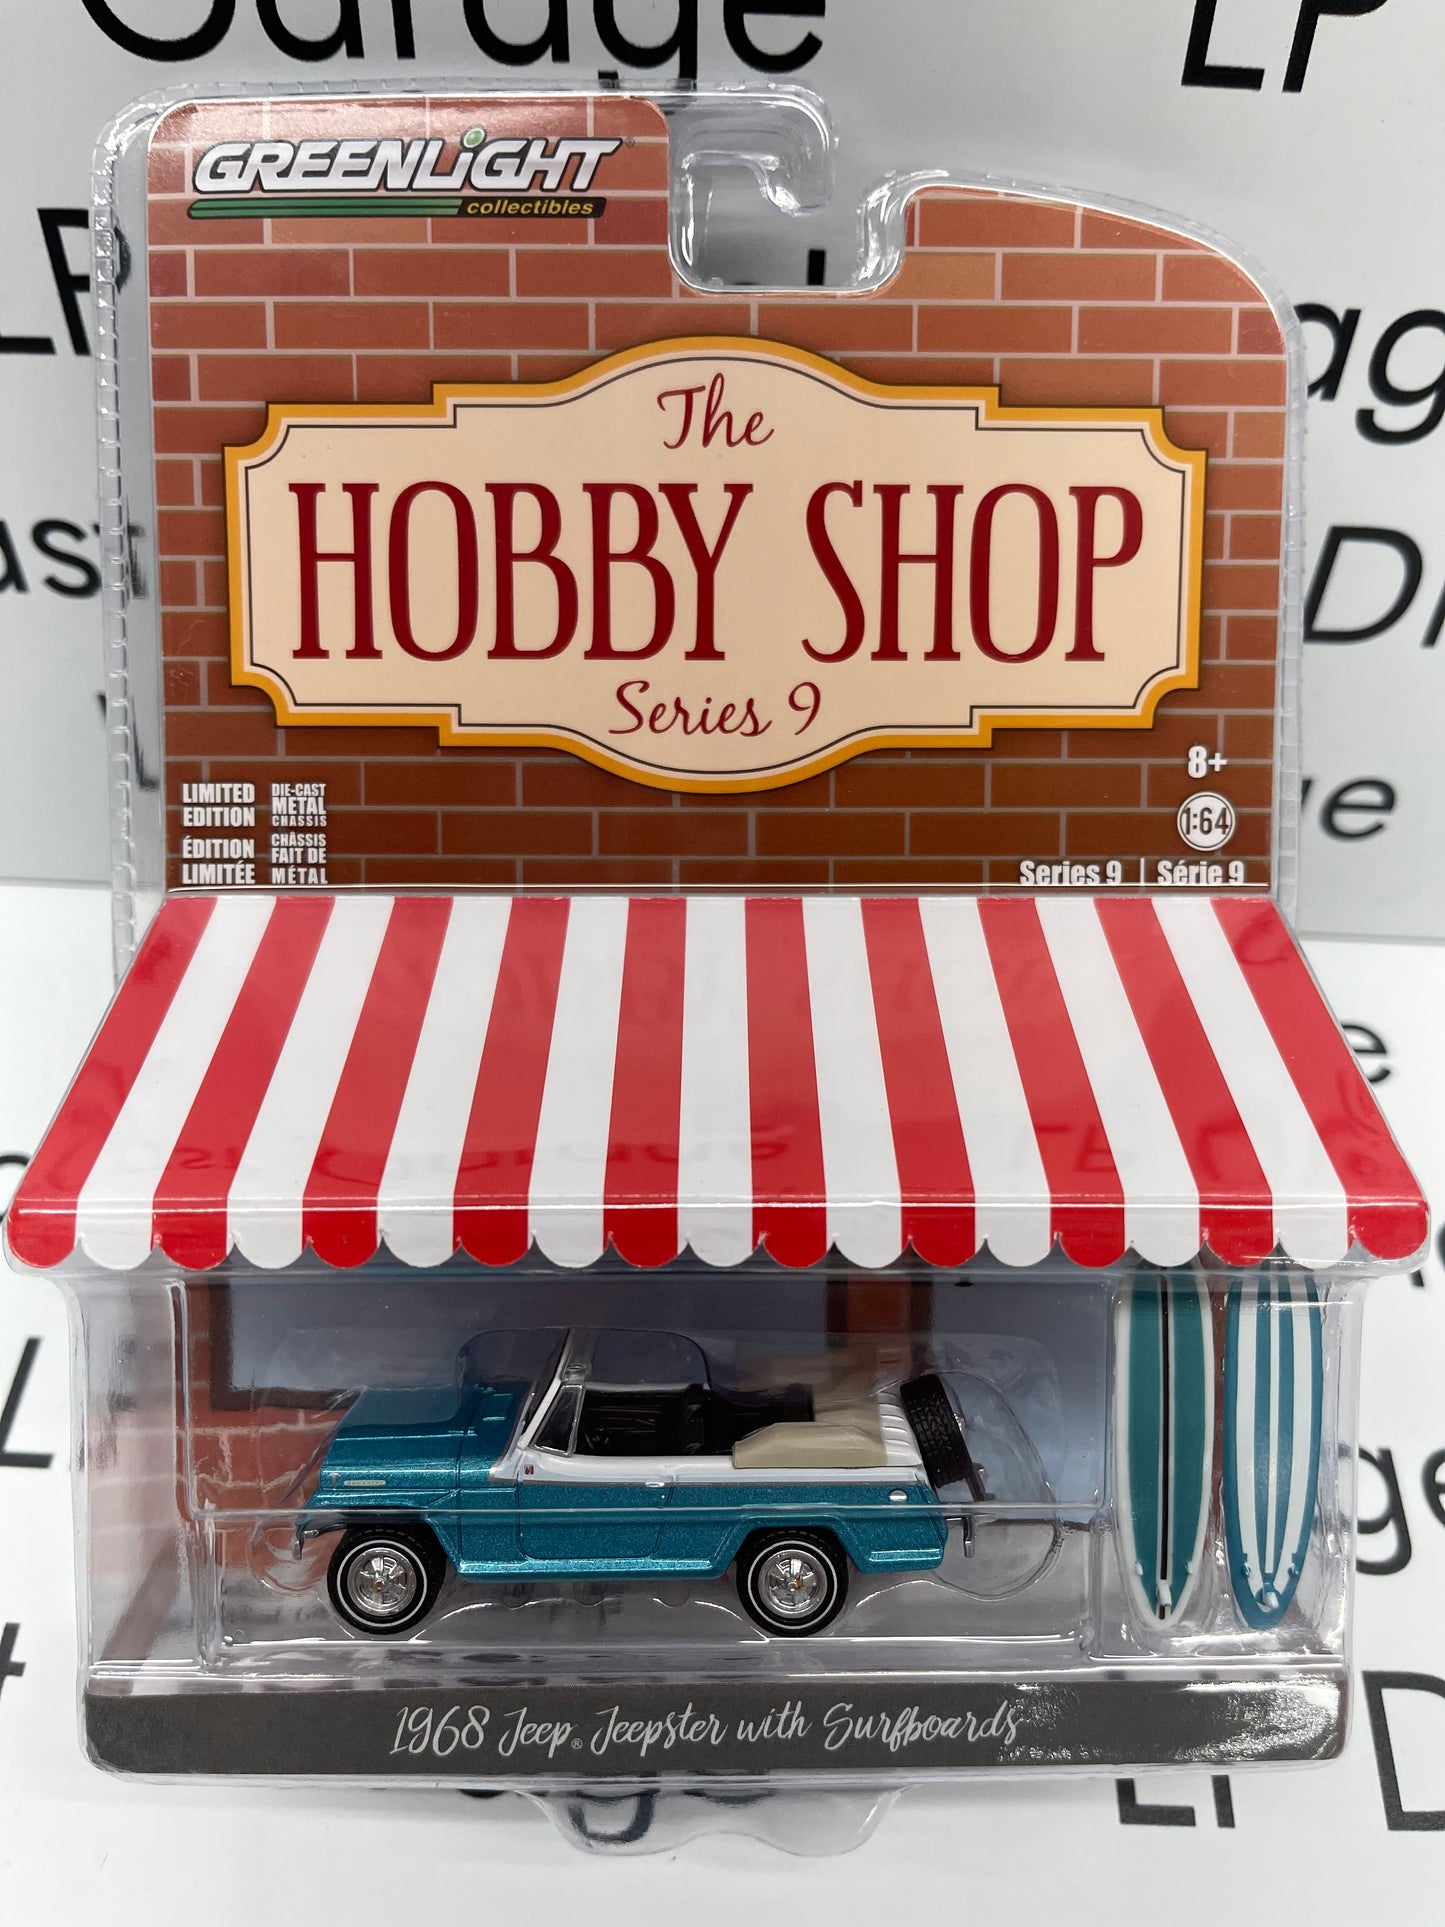 GREENLIGHT 1968 Jeep Jeepster with Surfboards Hobby Shop Series 9 1:64 Diecast